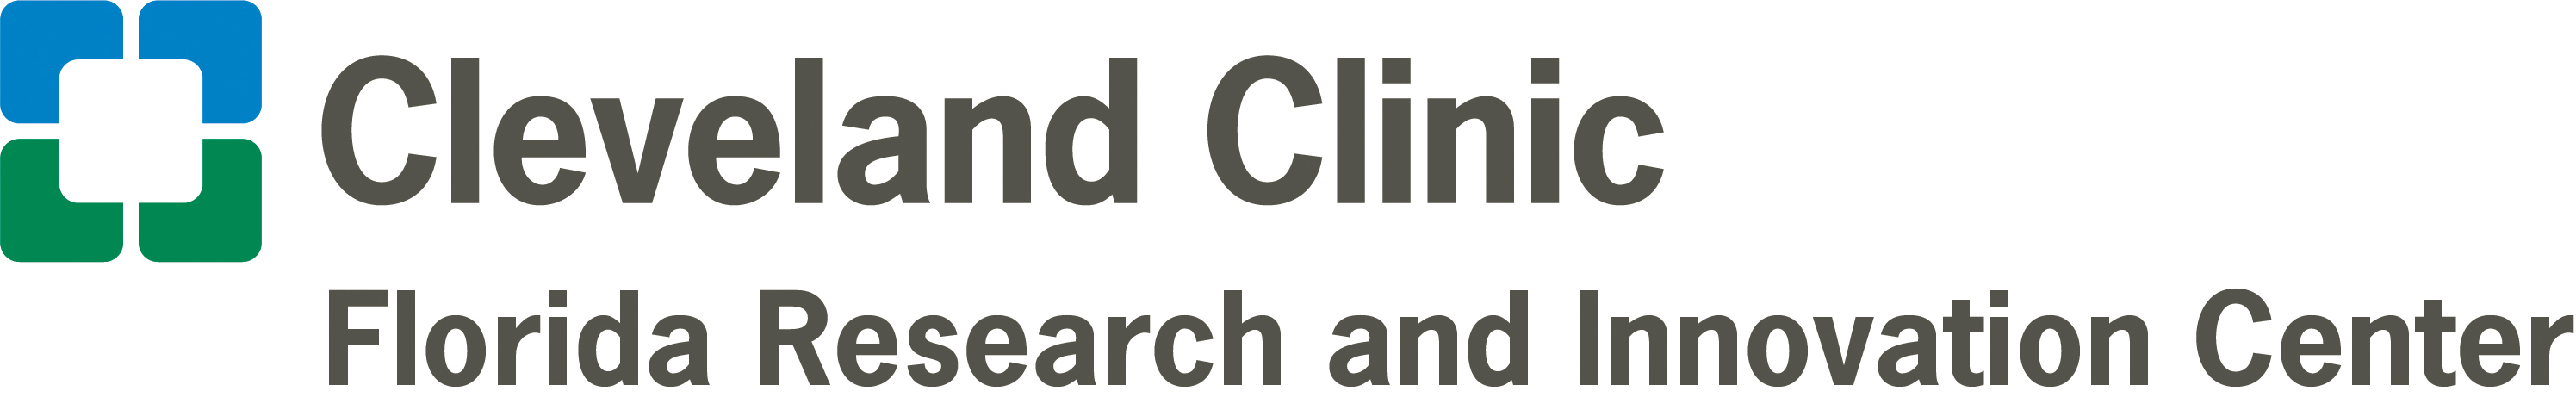 The Cleveland Clinic Florida Research and Innovation Center logo